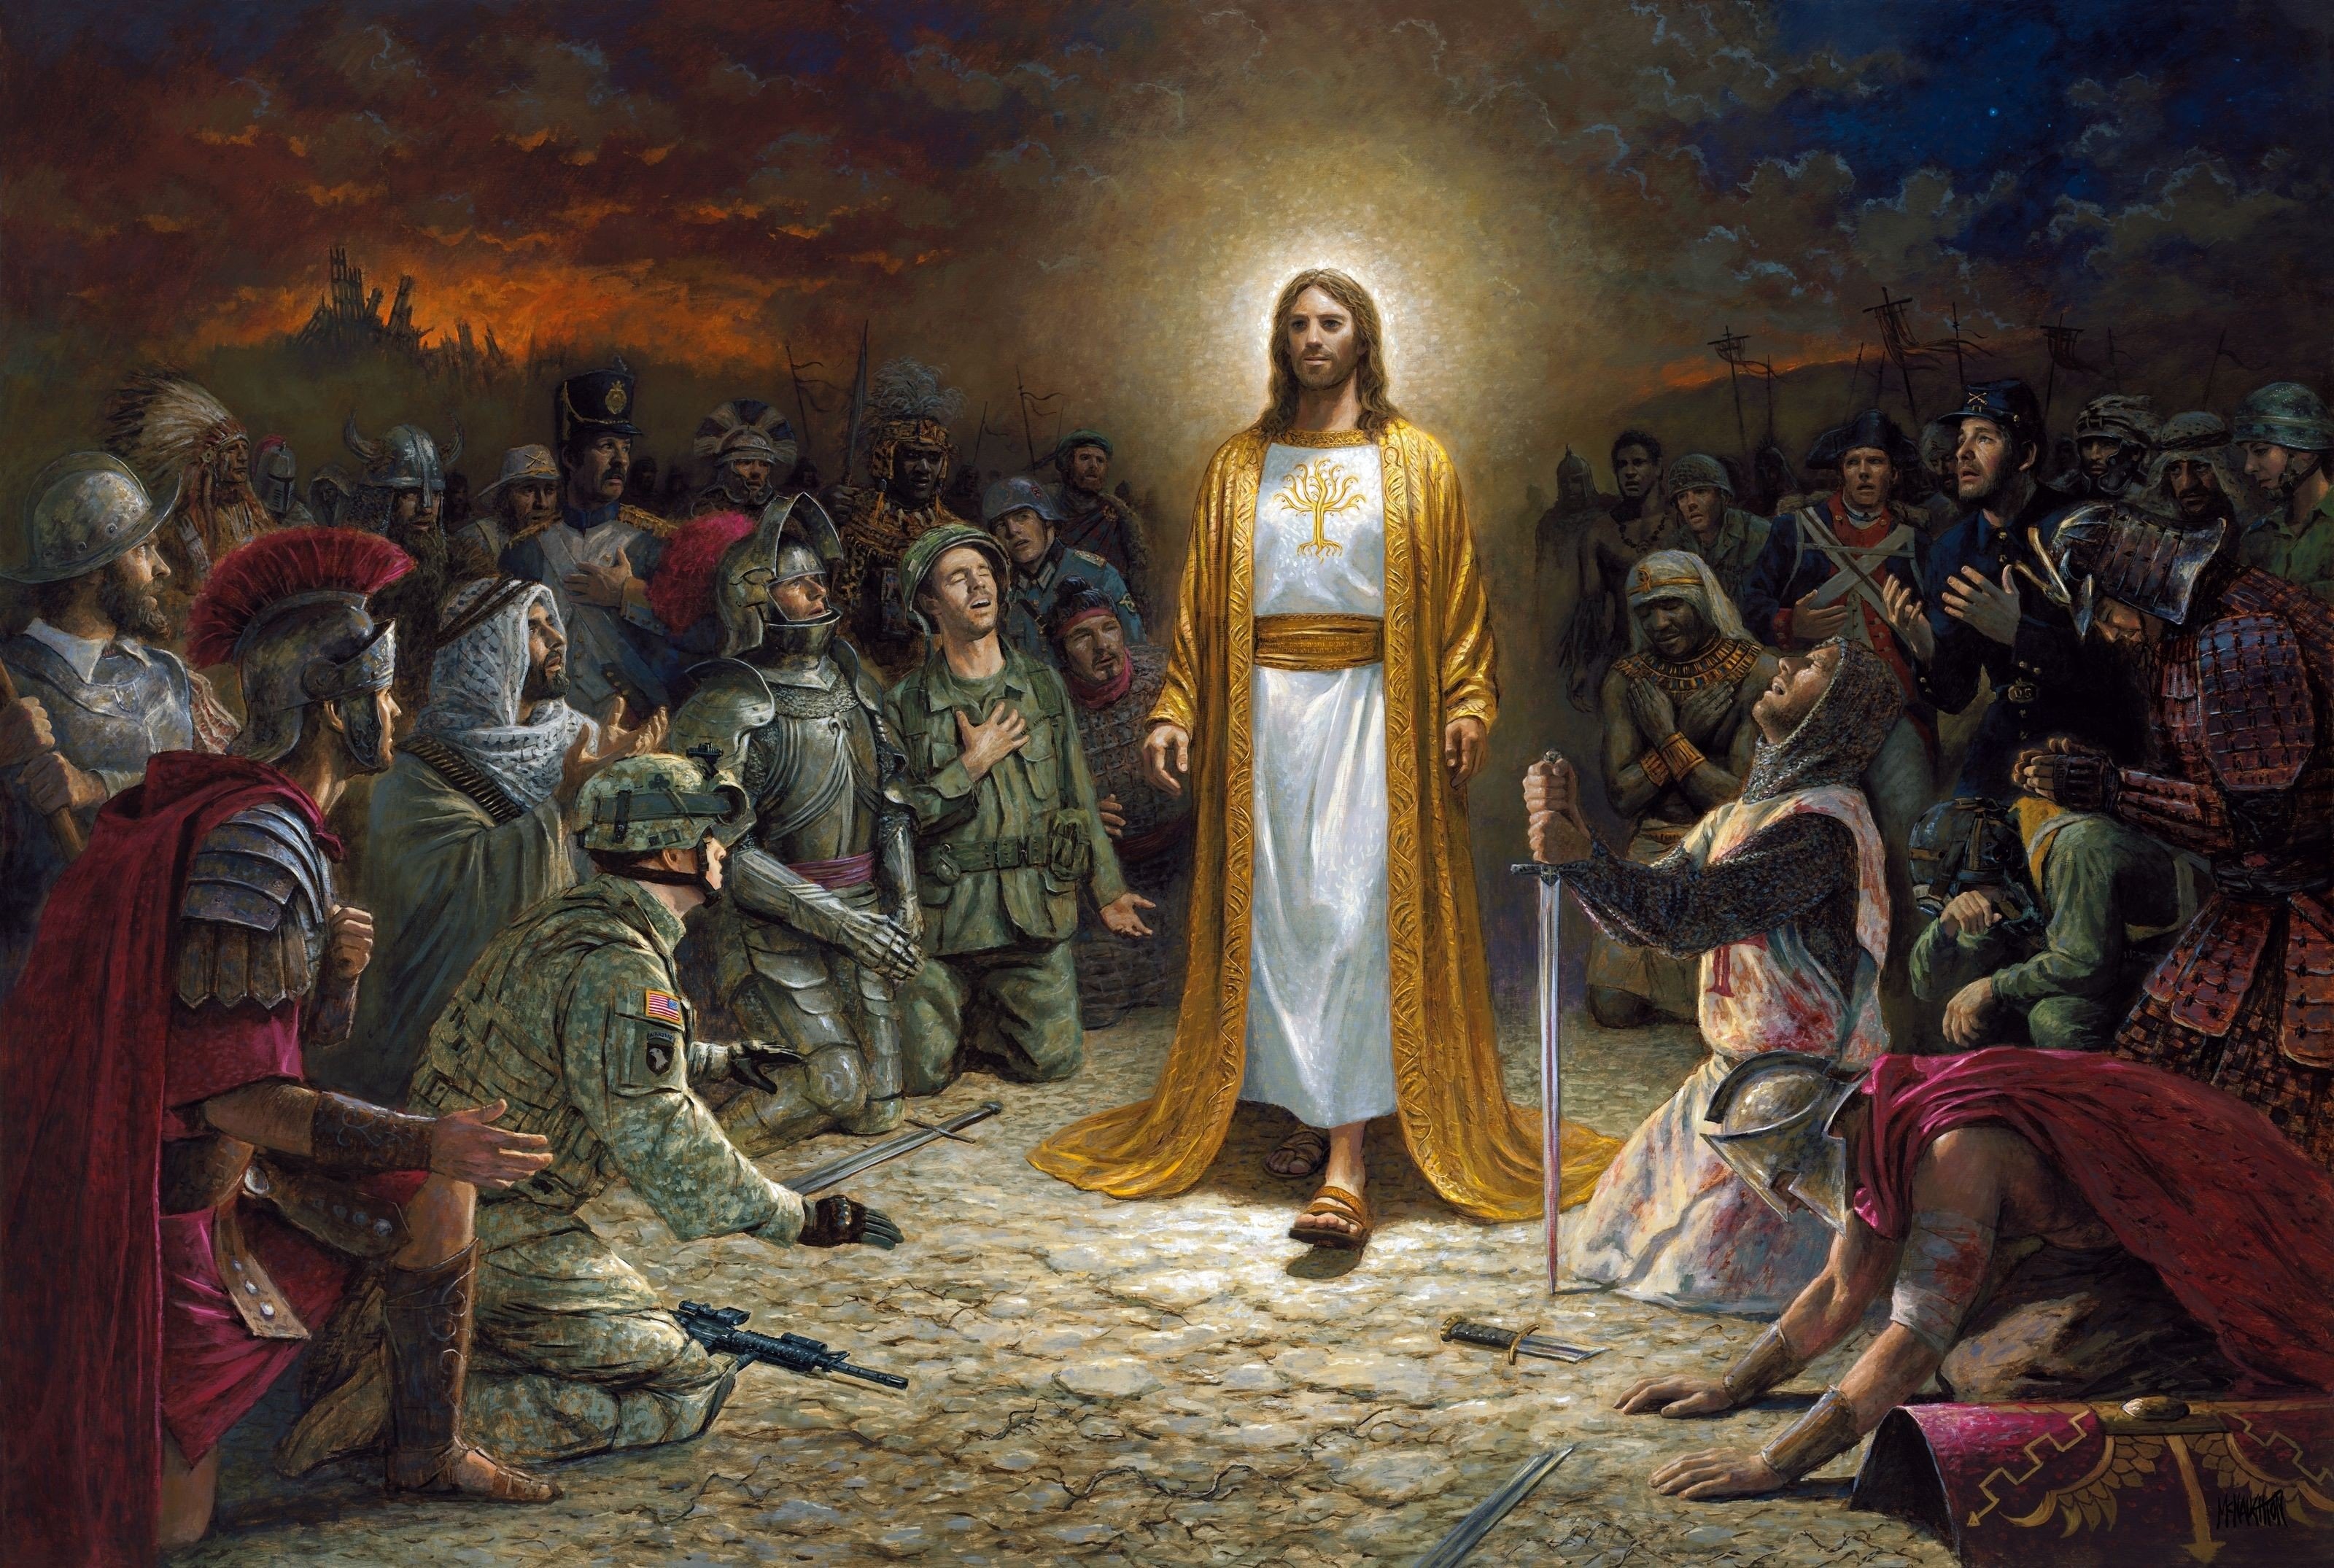 Jesus Christ, Painting, Kneeling, Glowing, Soldier, Warrior, Sword, Jon McNaughton, The Tree of the Knowledge of Good and Evil Wallpaper